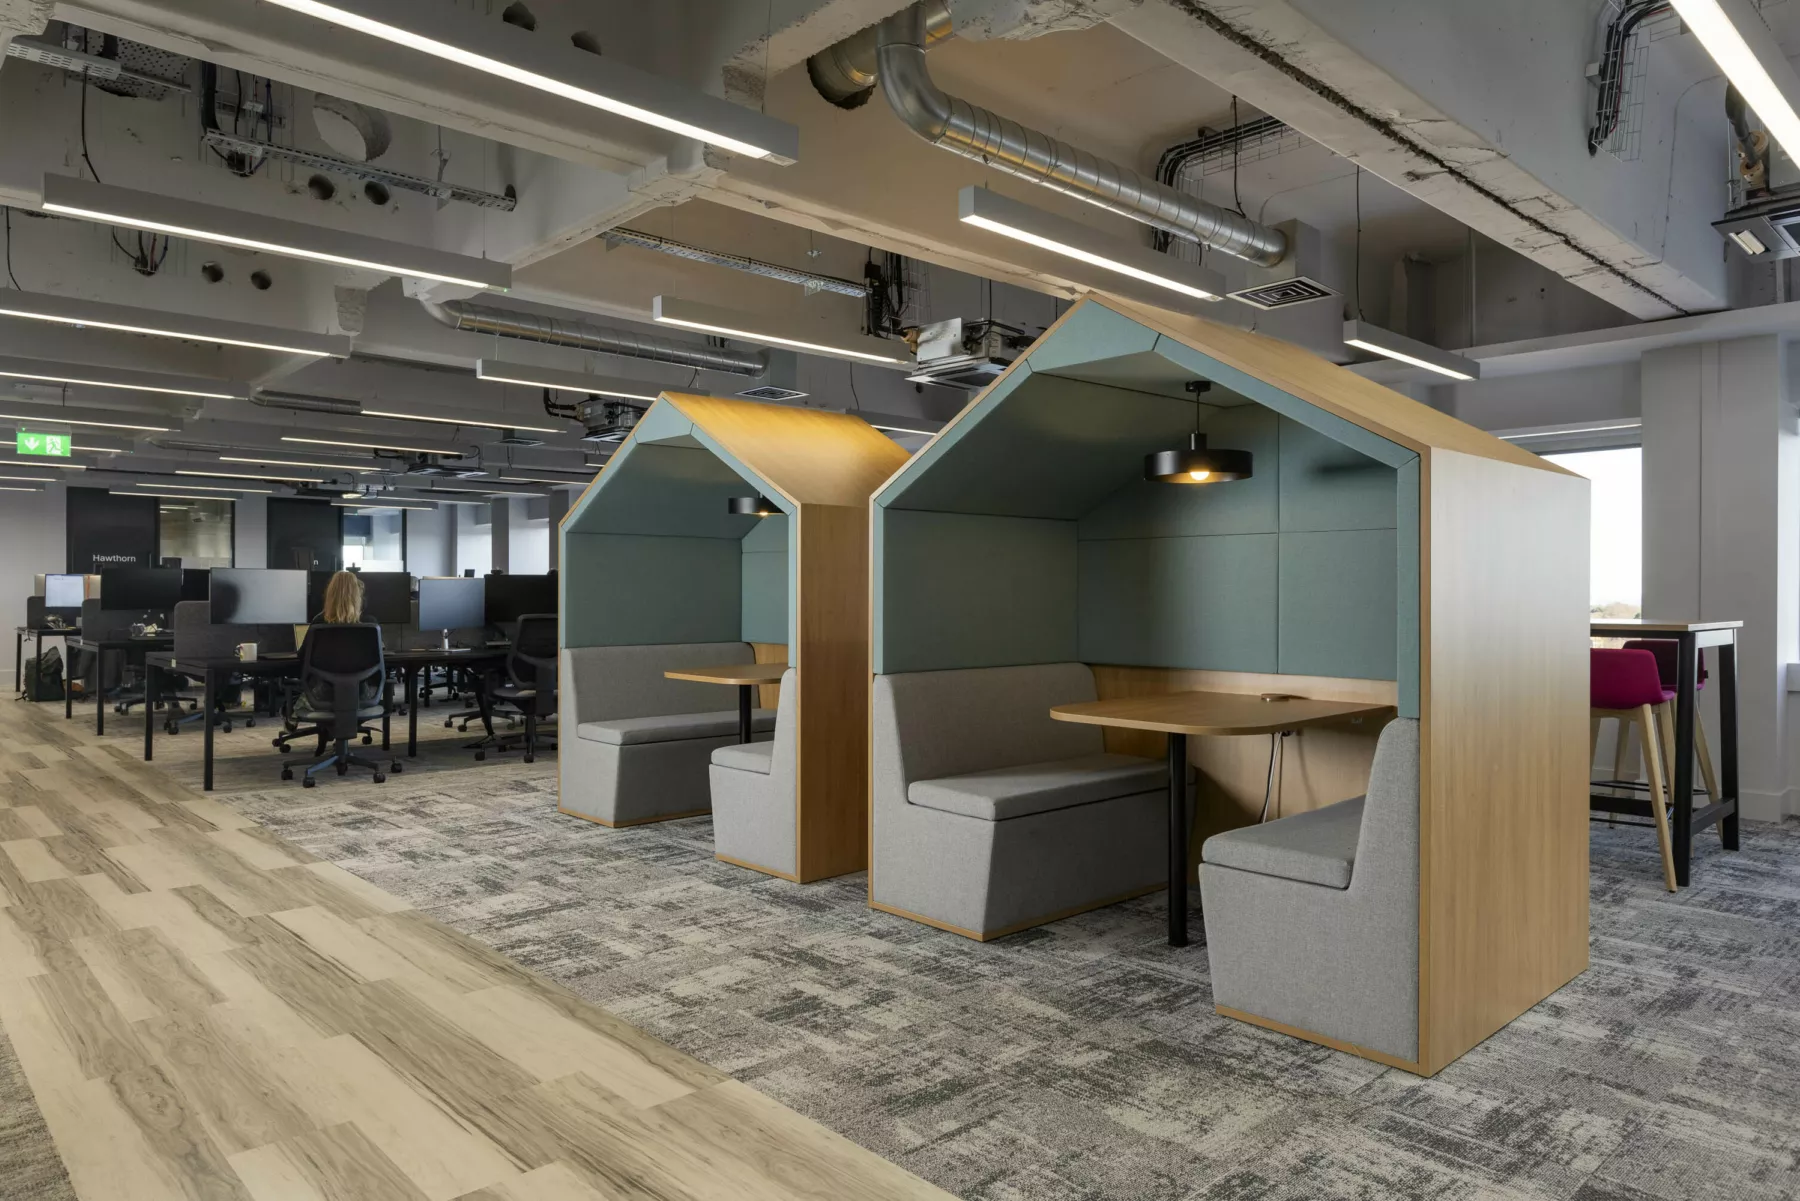 Pod booths within open plan office, refurbished with refurbishment features such as exposed ducting and services. Mixed flooring with areas to provide sound proofing.